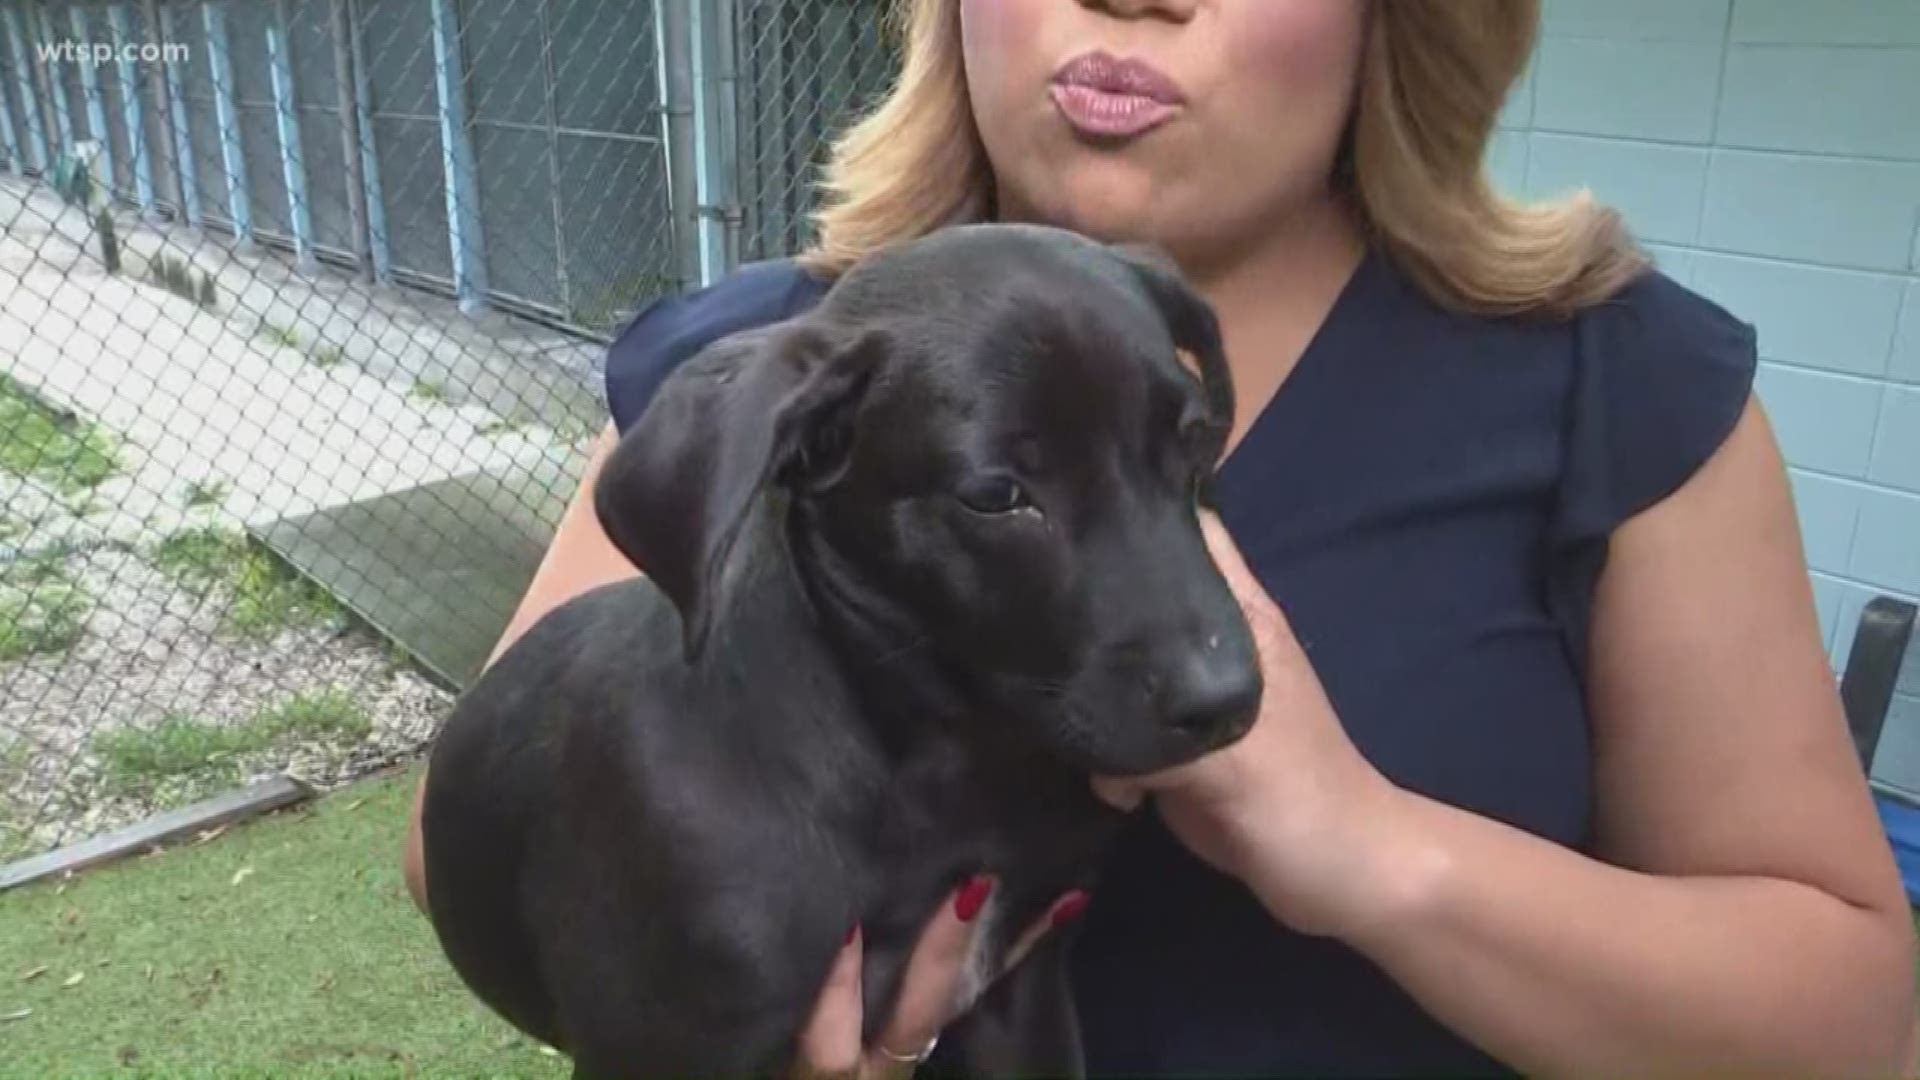 A shelter in Largo received animals in an effort to keep them safe from Dorian. The shelter will get them ready for adoption within a few days.